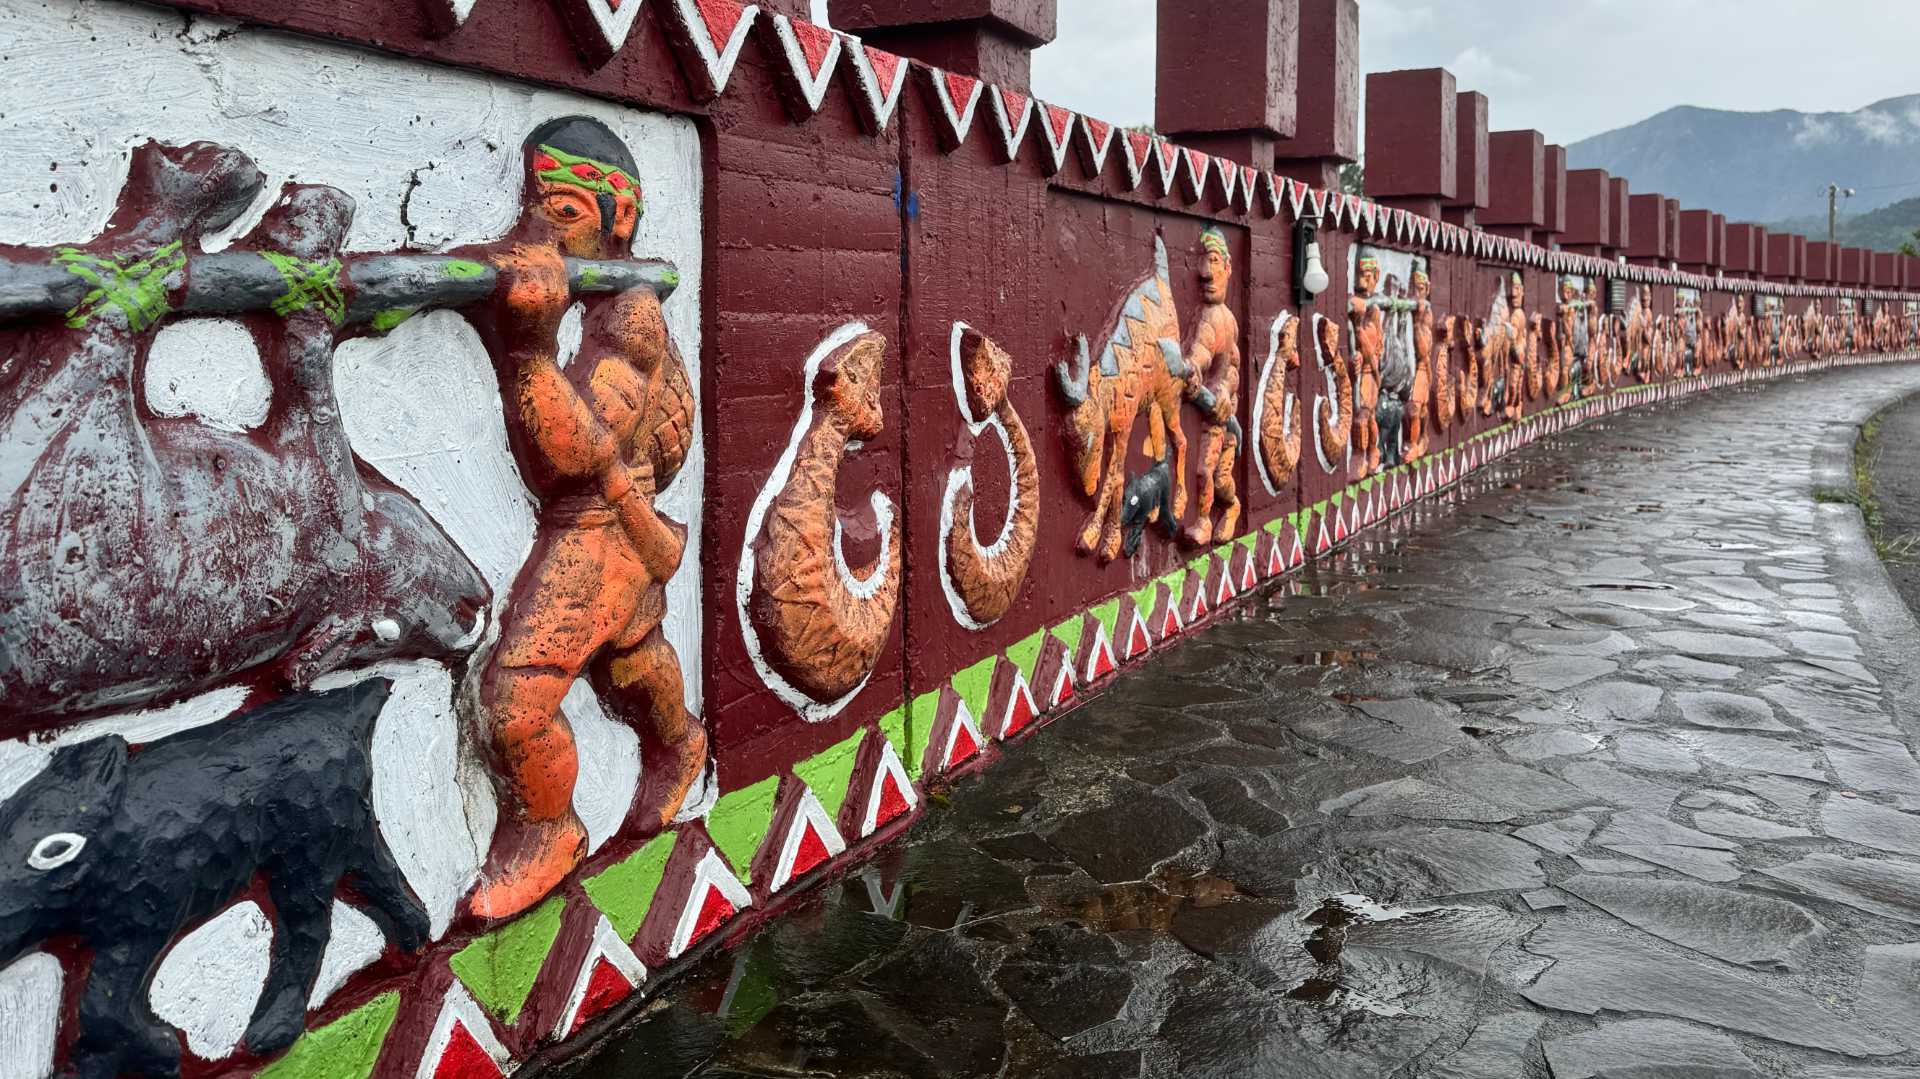 A painted relief on a bridge. The paintings show people carrying dead animals or hunting animals.